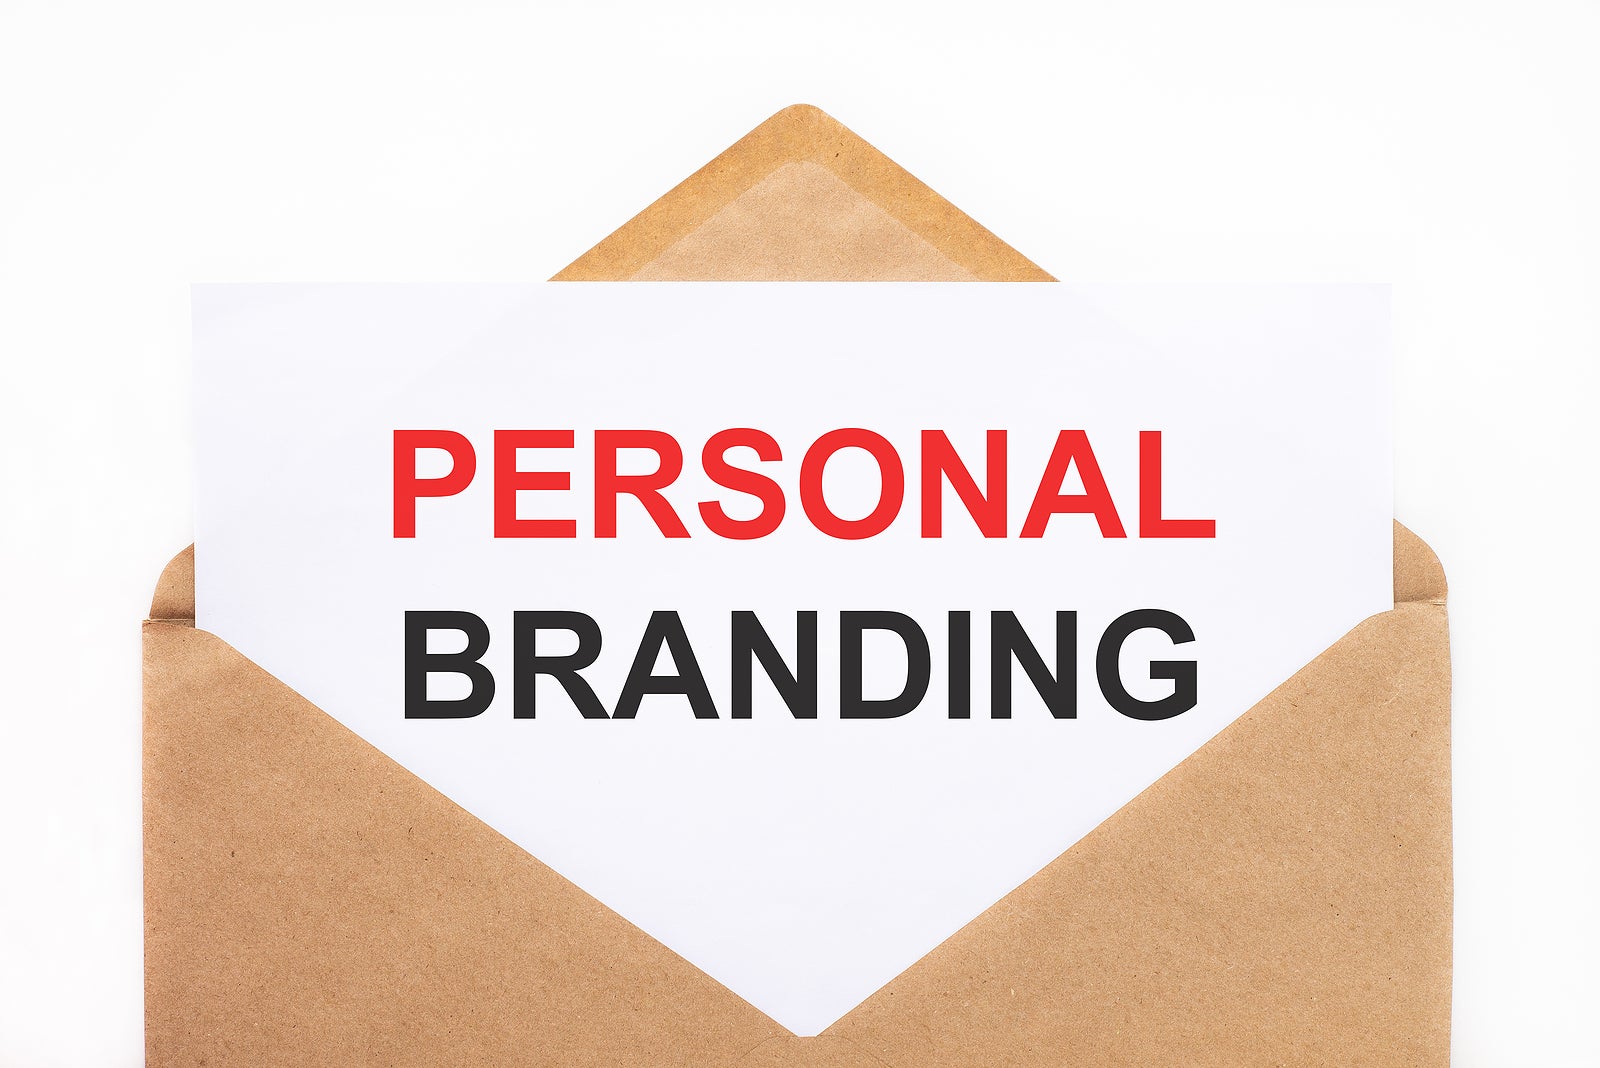 Why Traditional Mail Marketing Works Great for Branding